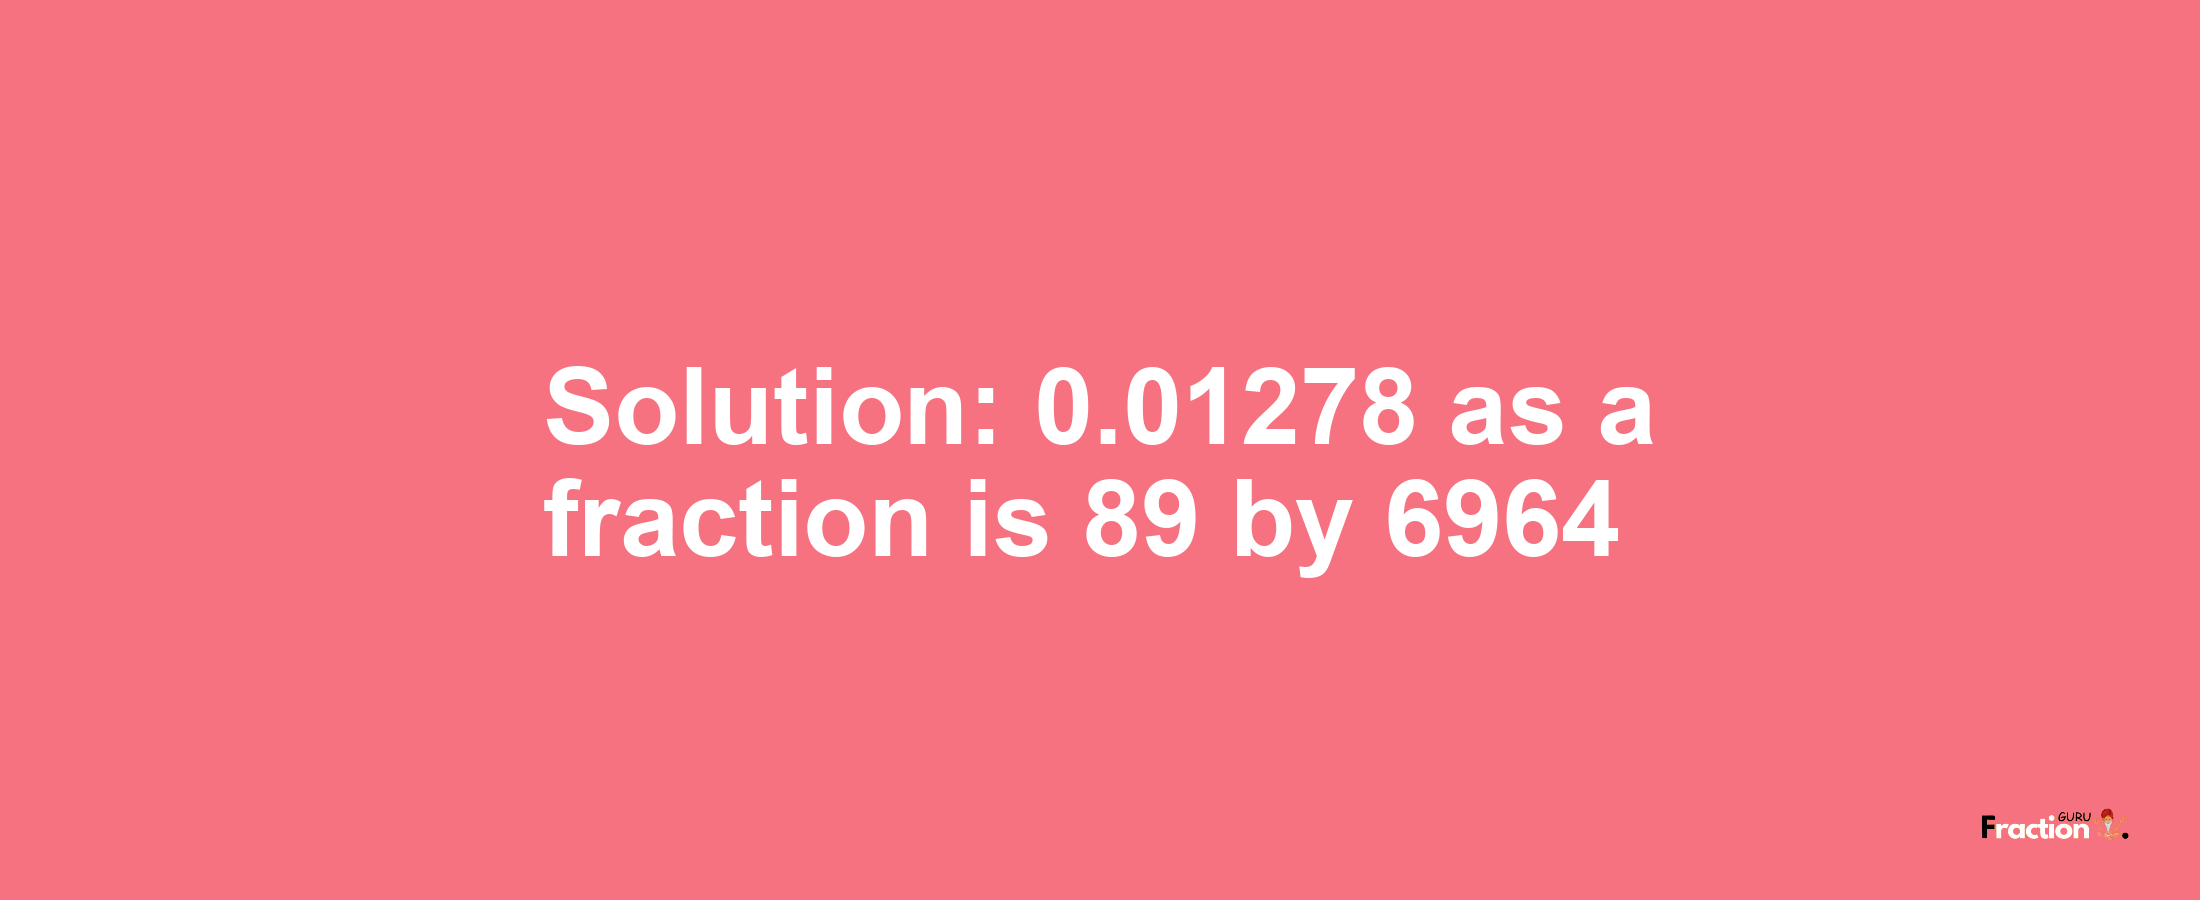 Solution:0.01278 as a fraction is 89/6964